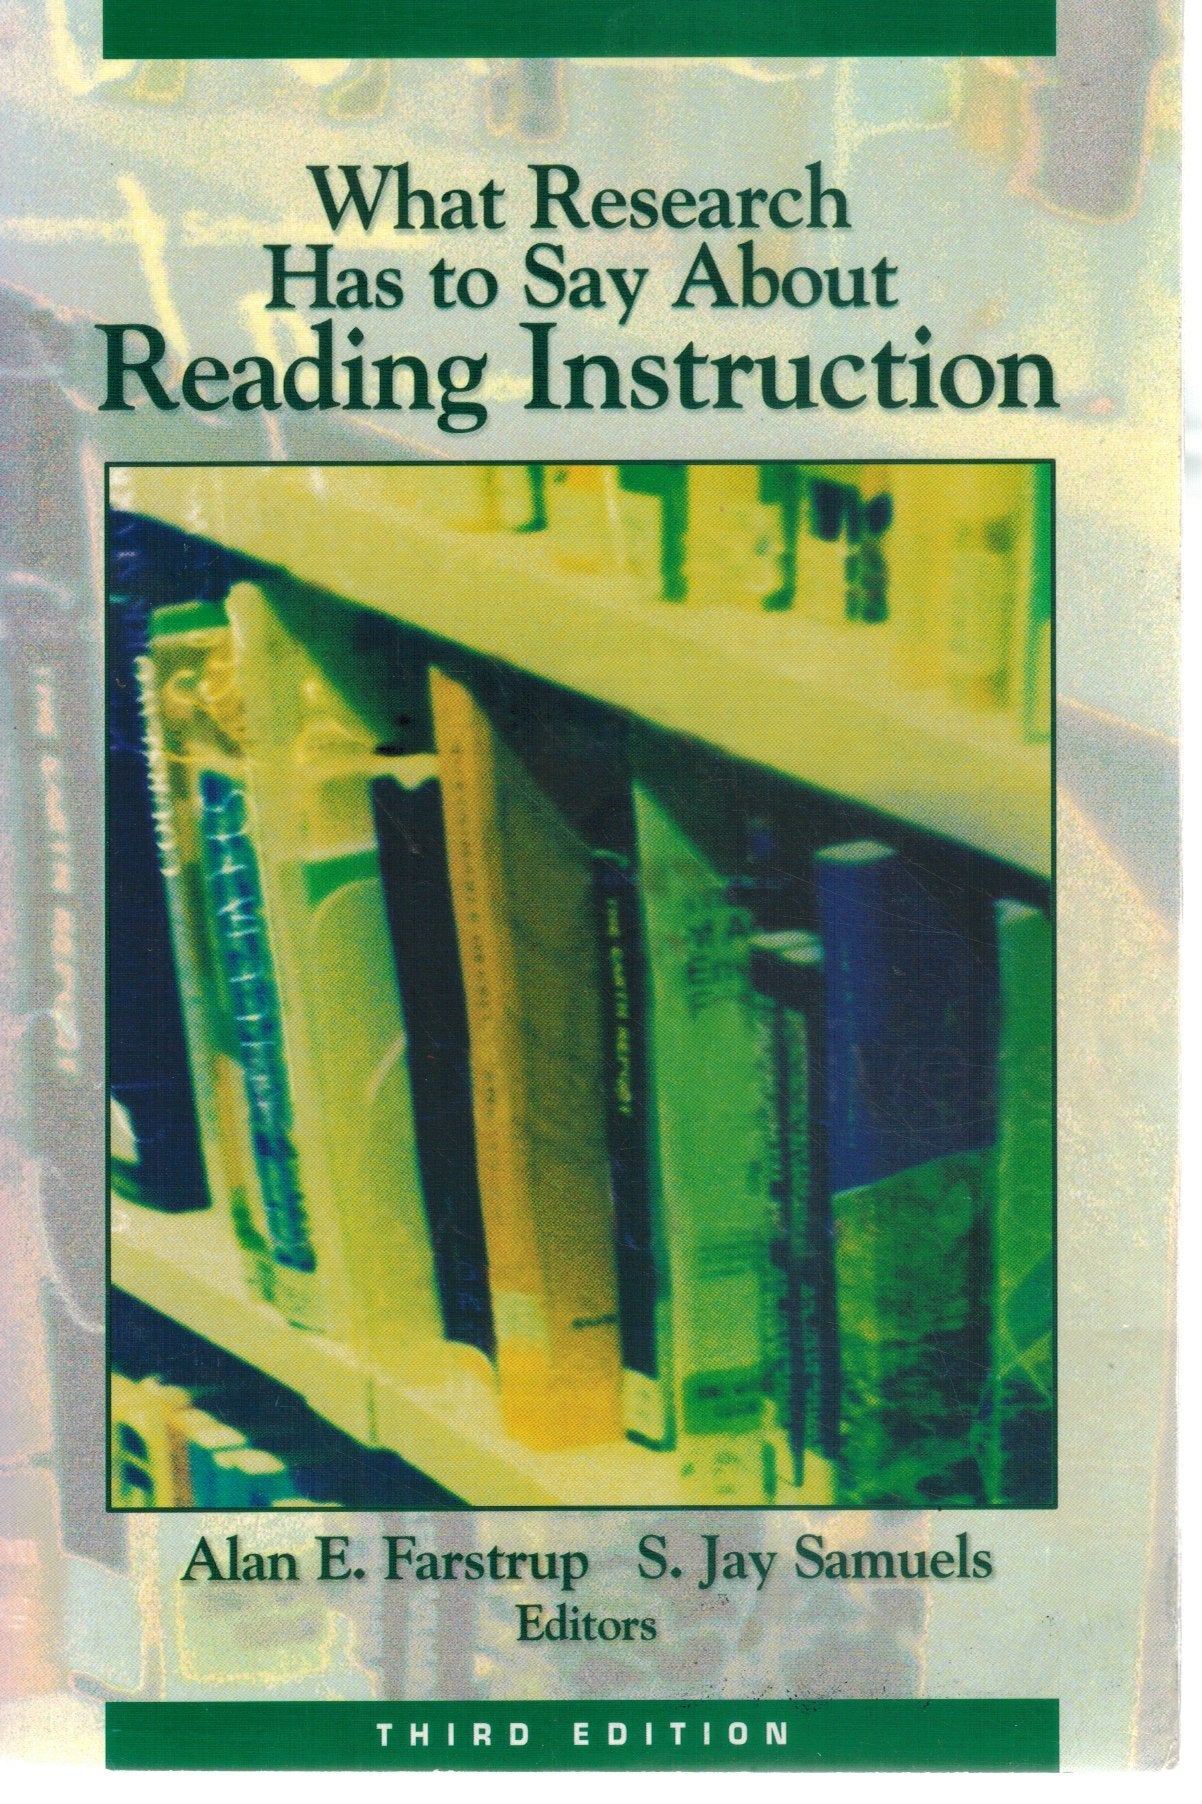 WHAT RESEARCH HAS TO SAY ABOUT READING INSTRUCTION  by Farstrup, Alan E. & S. Jay Samuels